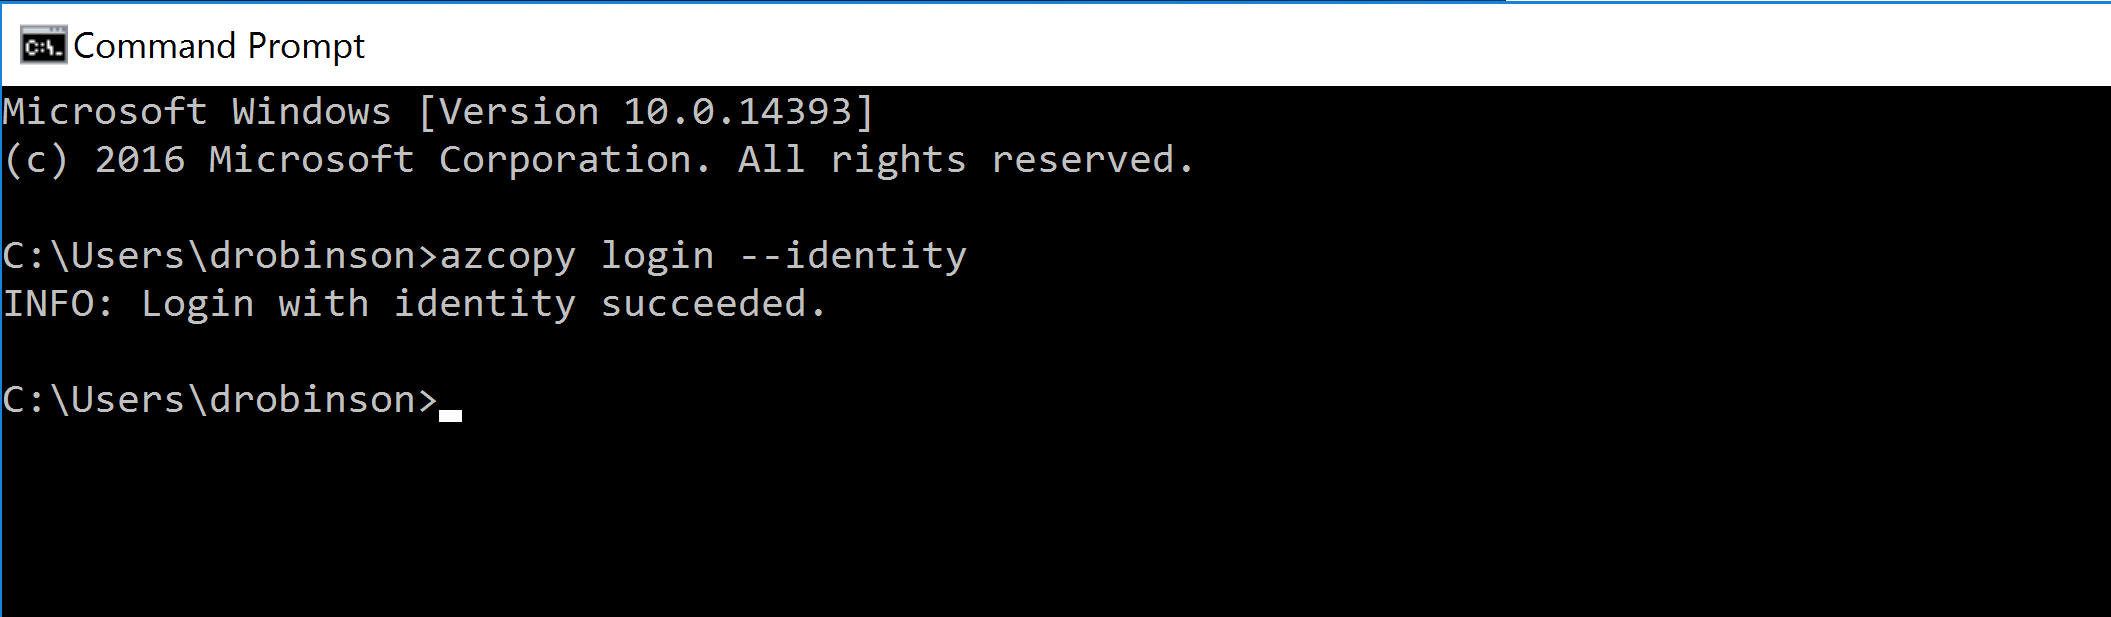 Login Using Managed Identity with AzCopy.PNG